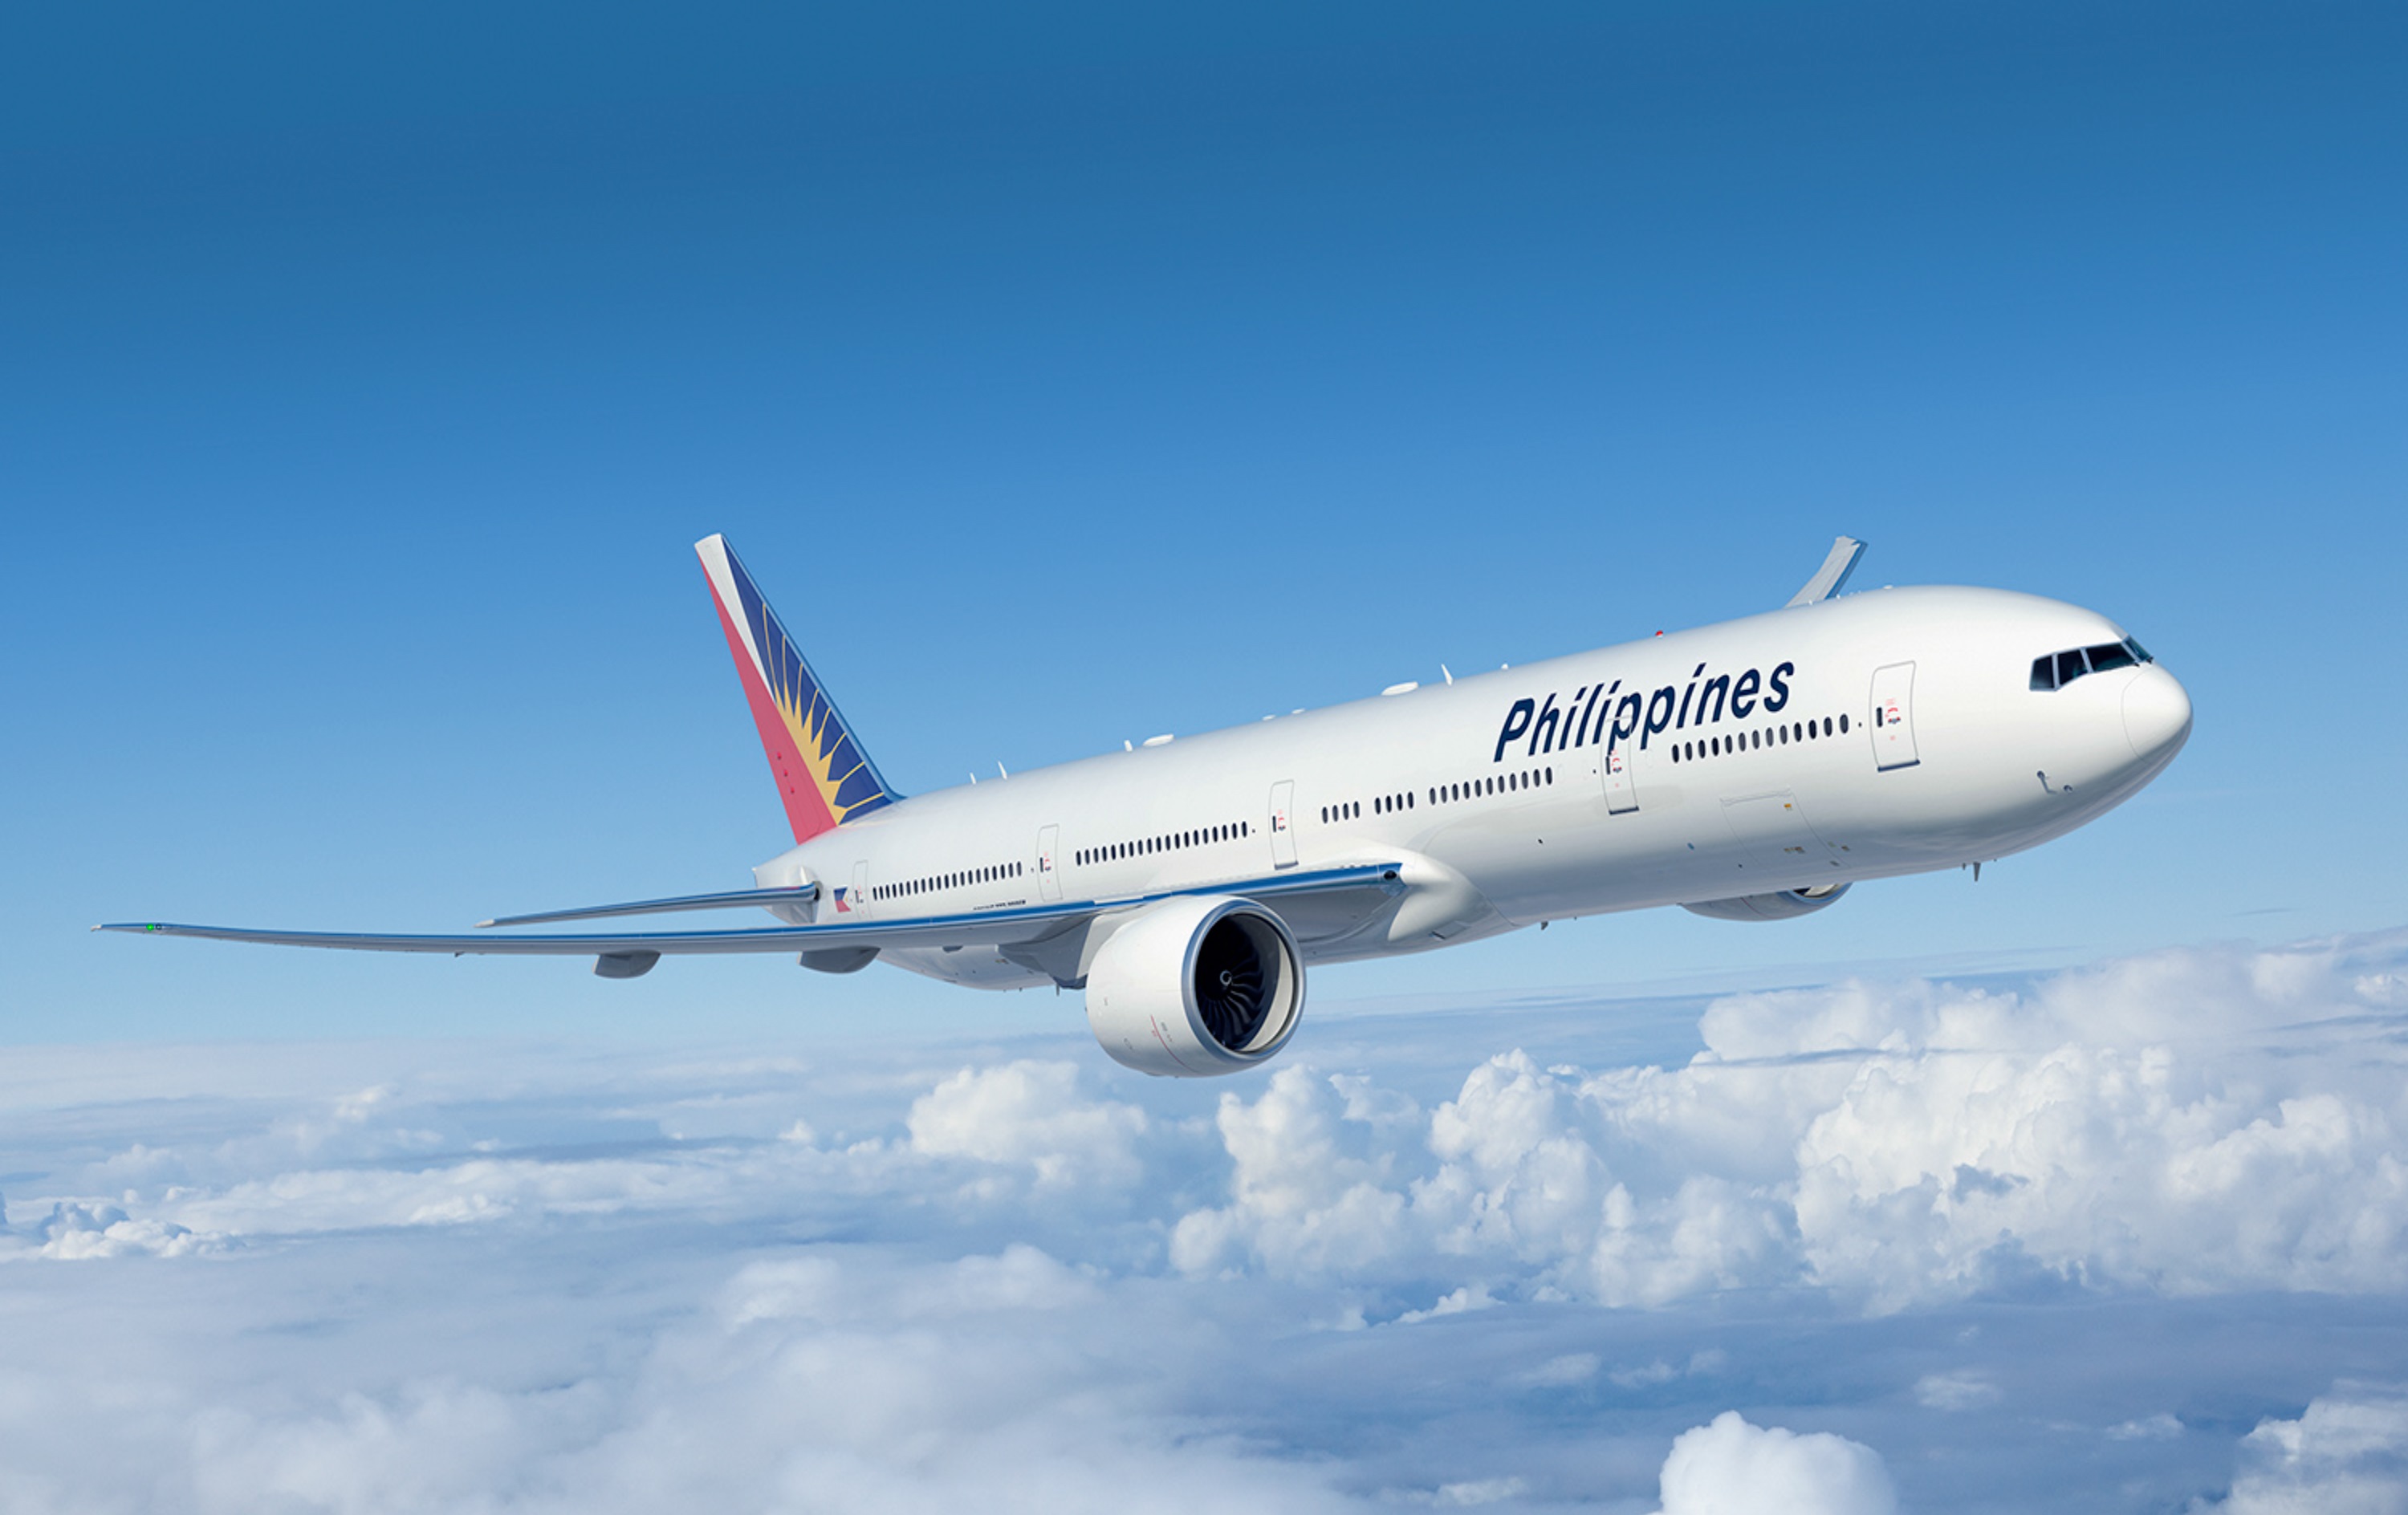 PAL flight from SFO to MNL